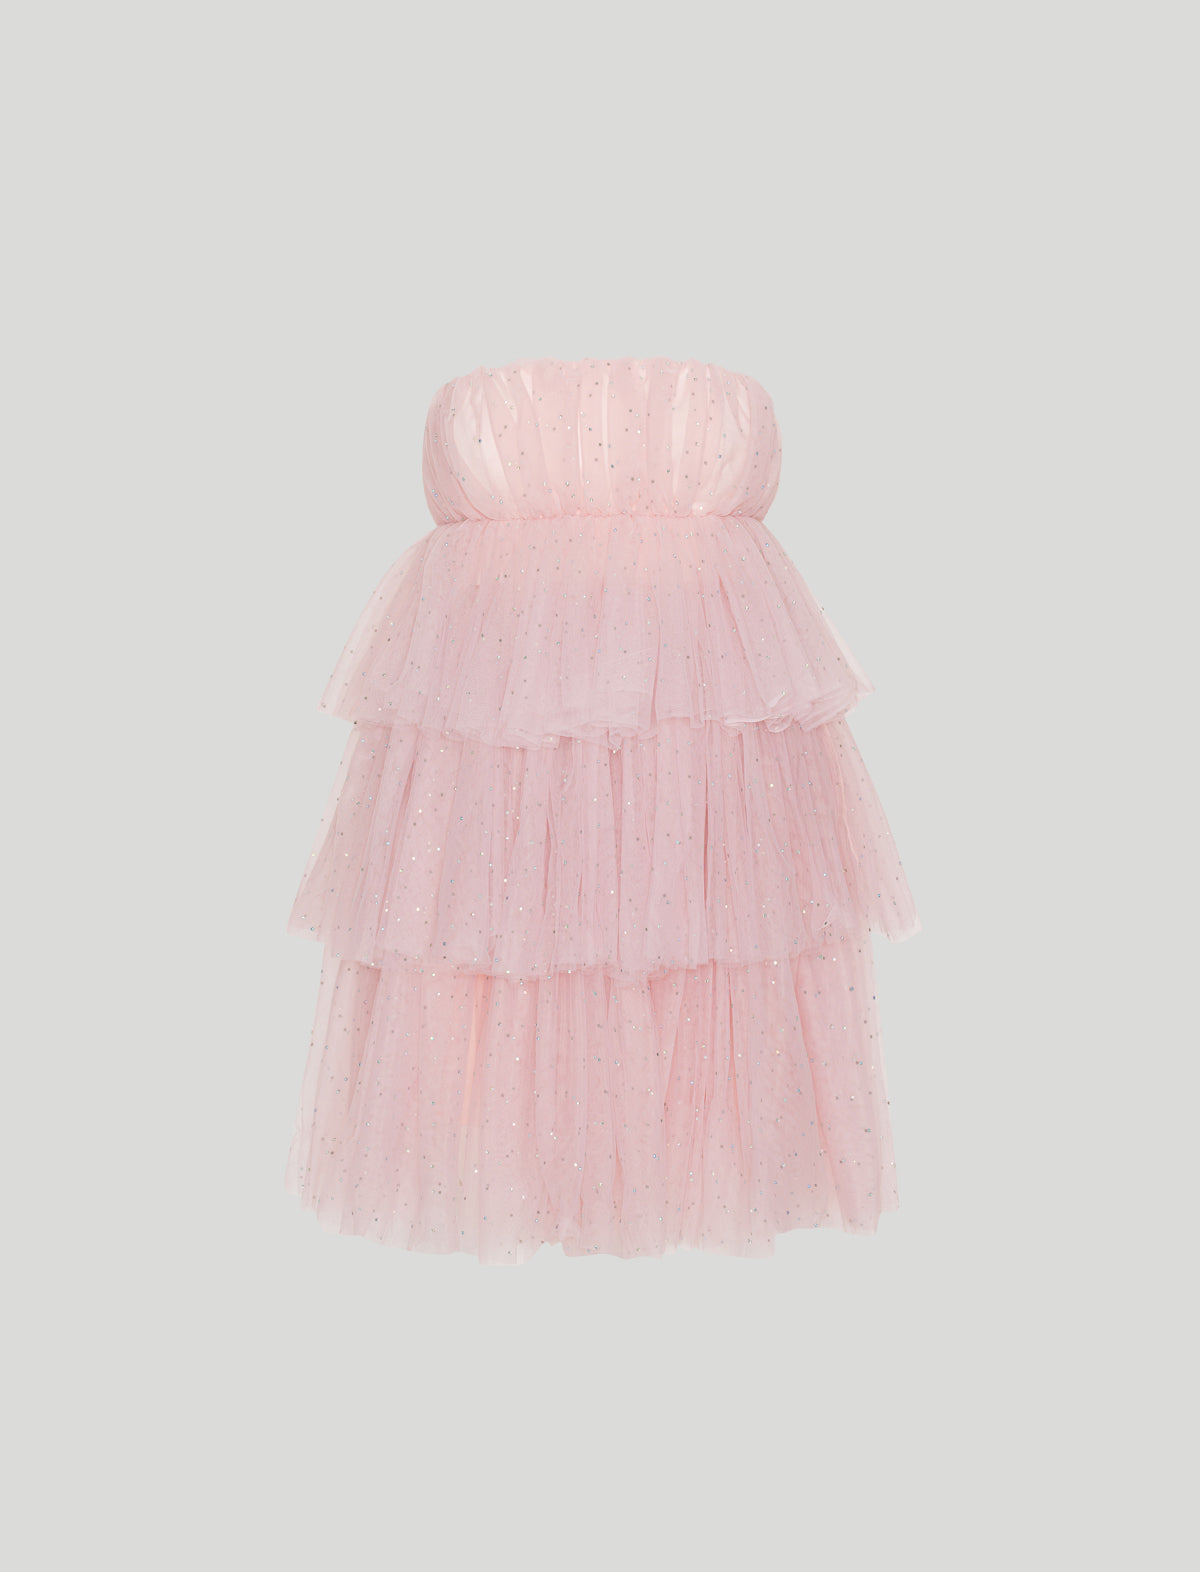 ROTATE ICONS Carlosa Crystal Tulle Ruffle Dress in Delicacy